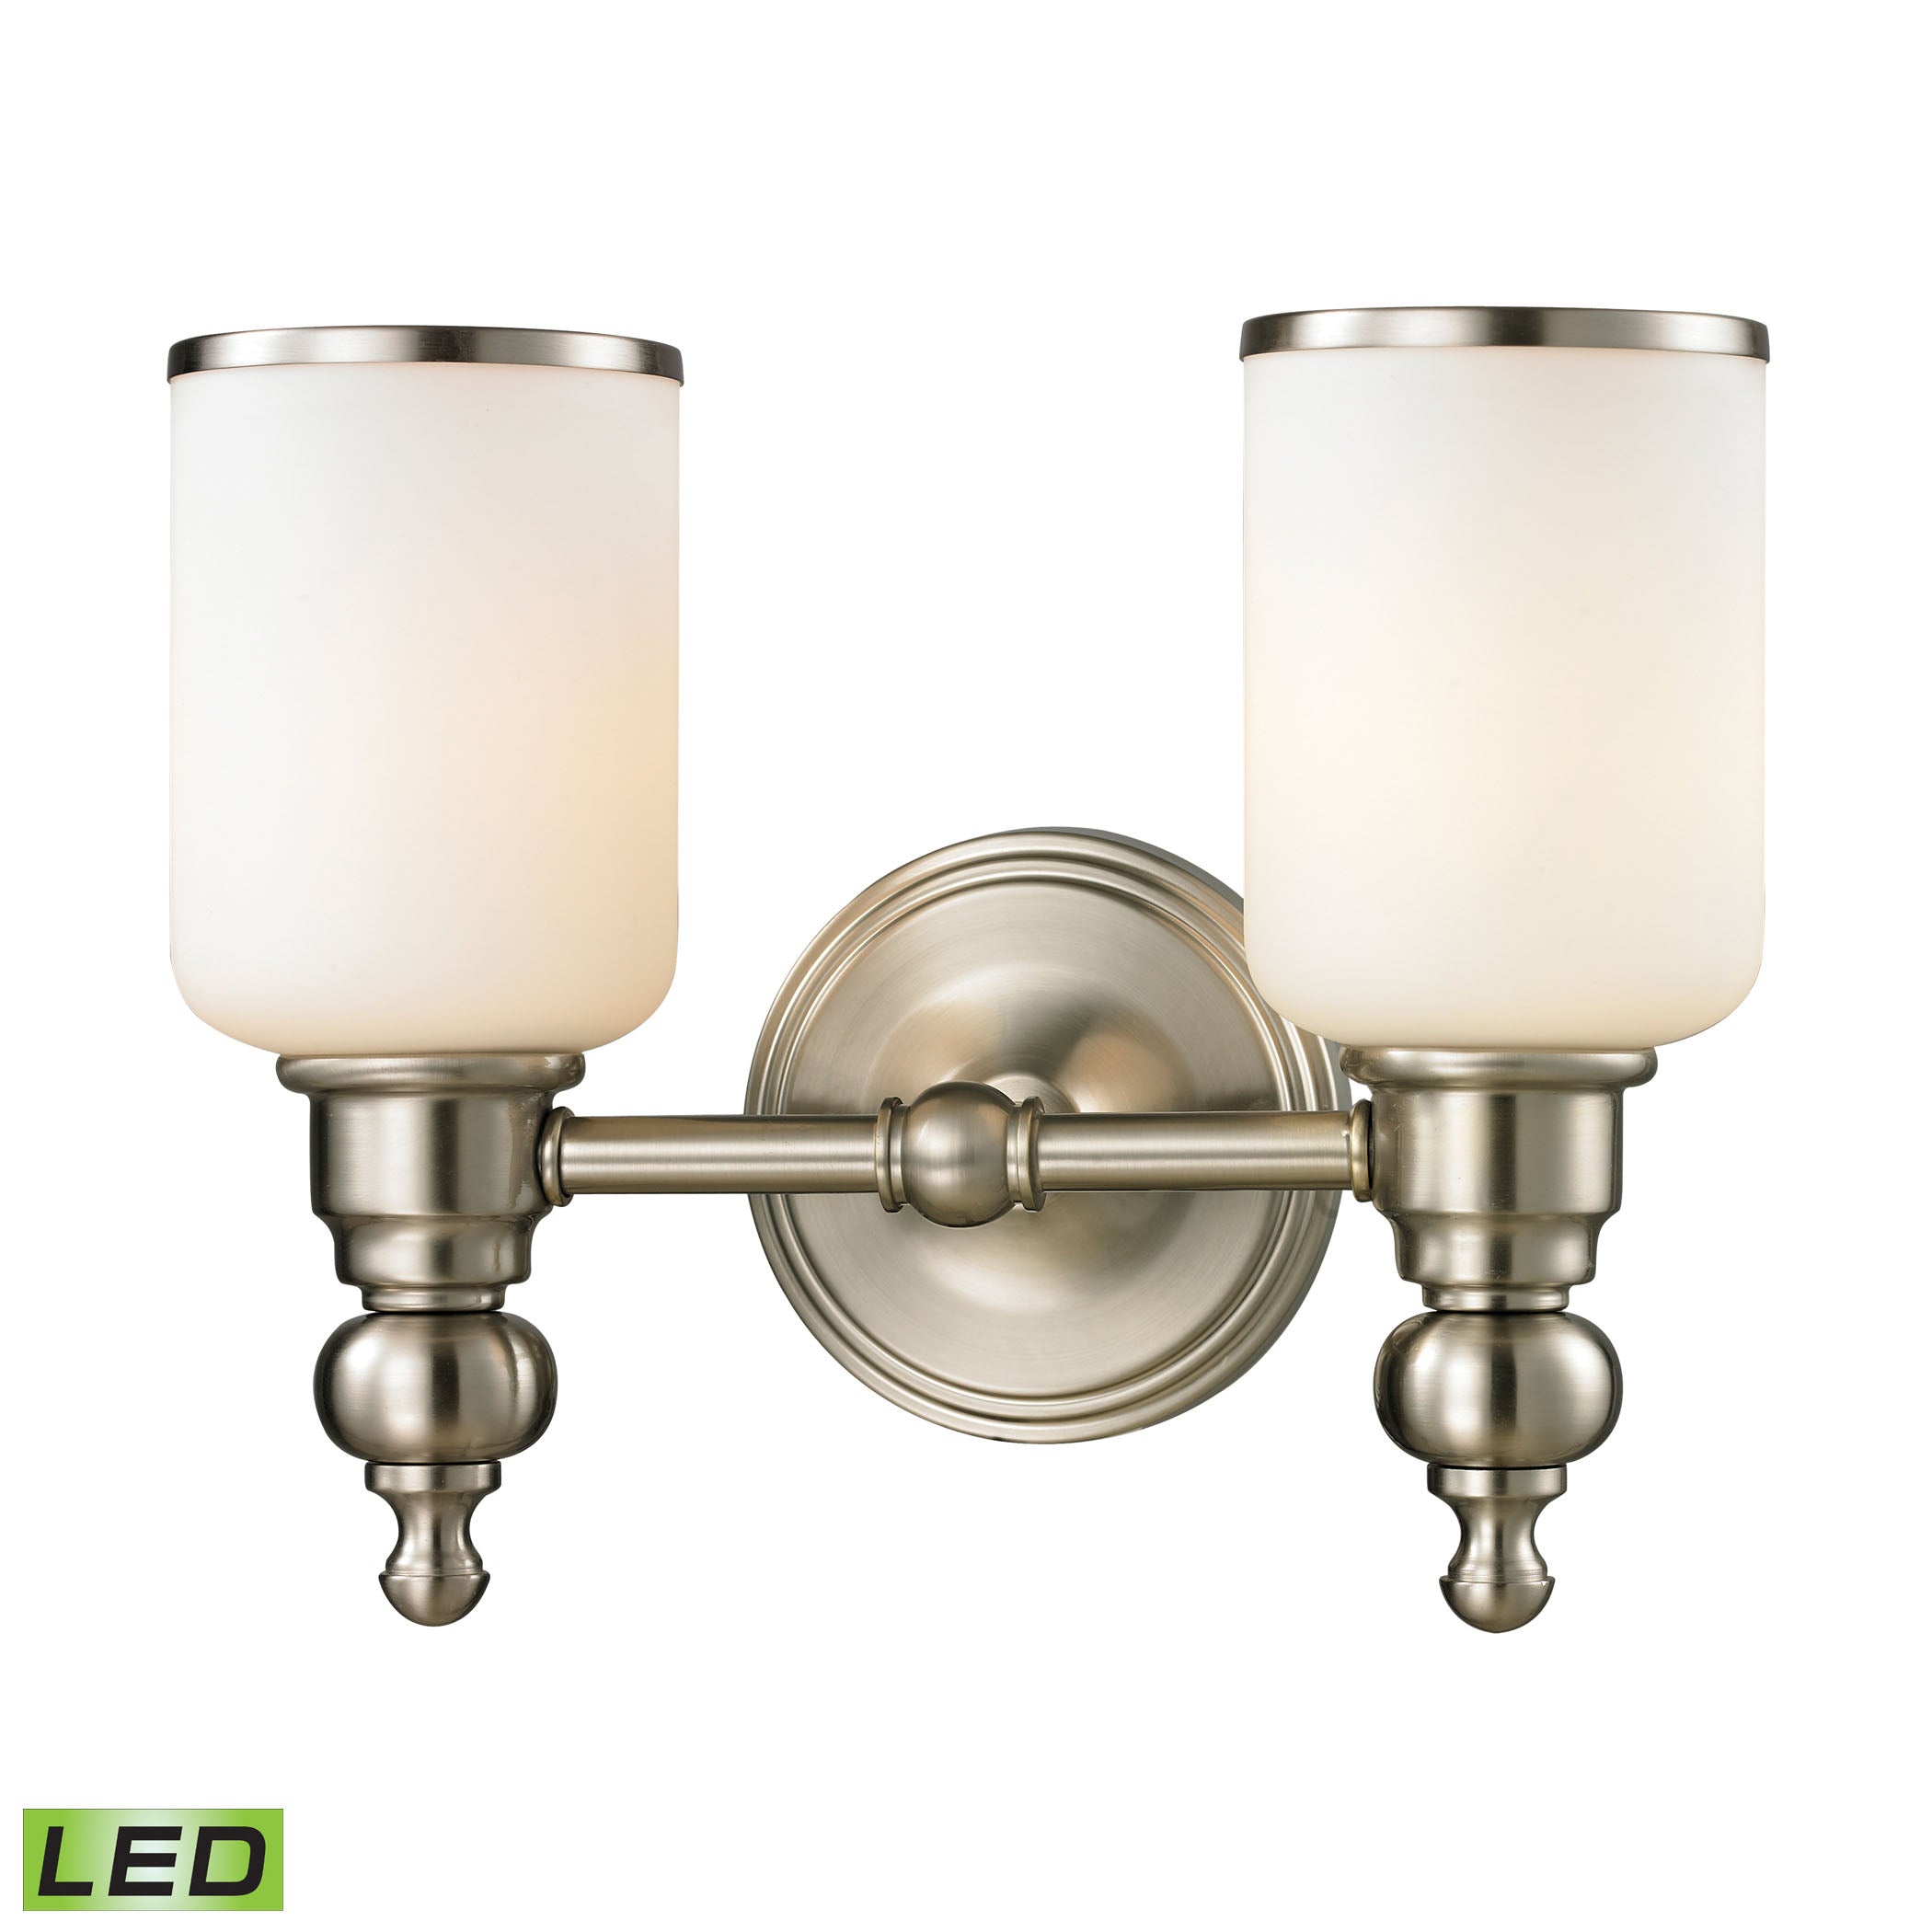 ELK Lighting 11581/2-LED Bristol 2-Light Vanity Lamp in Brushed Nickel with Opal White Blown Glass - Includes LED Bulbs